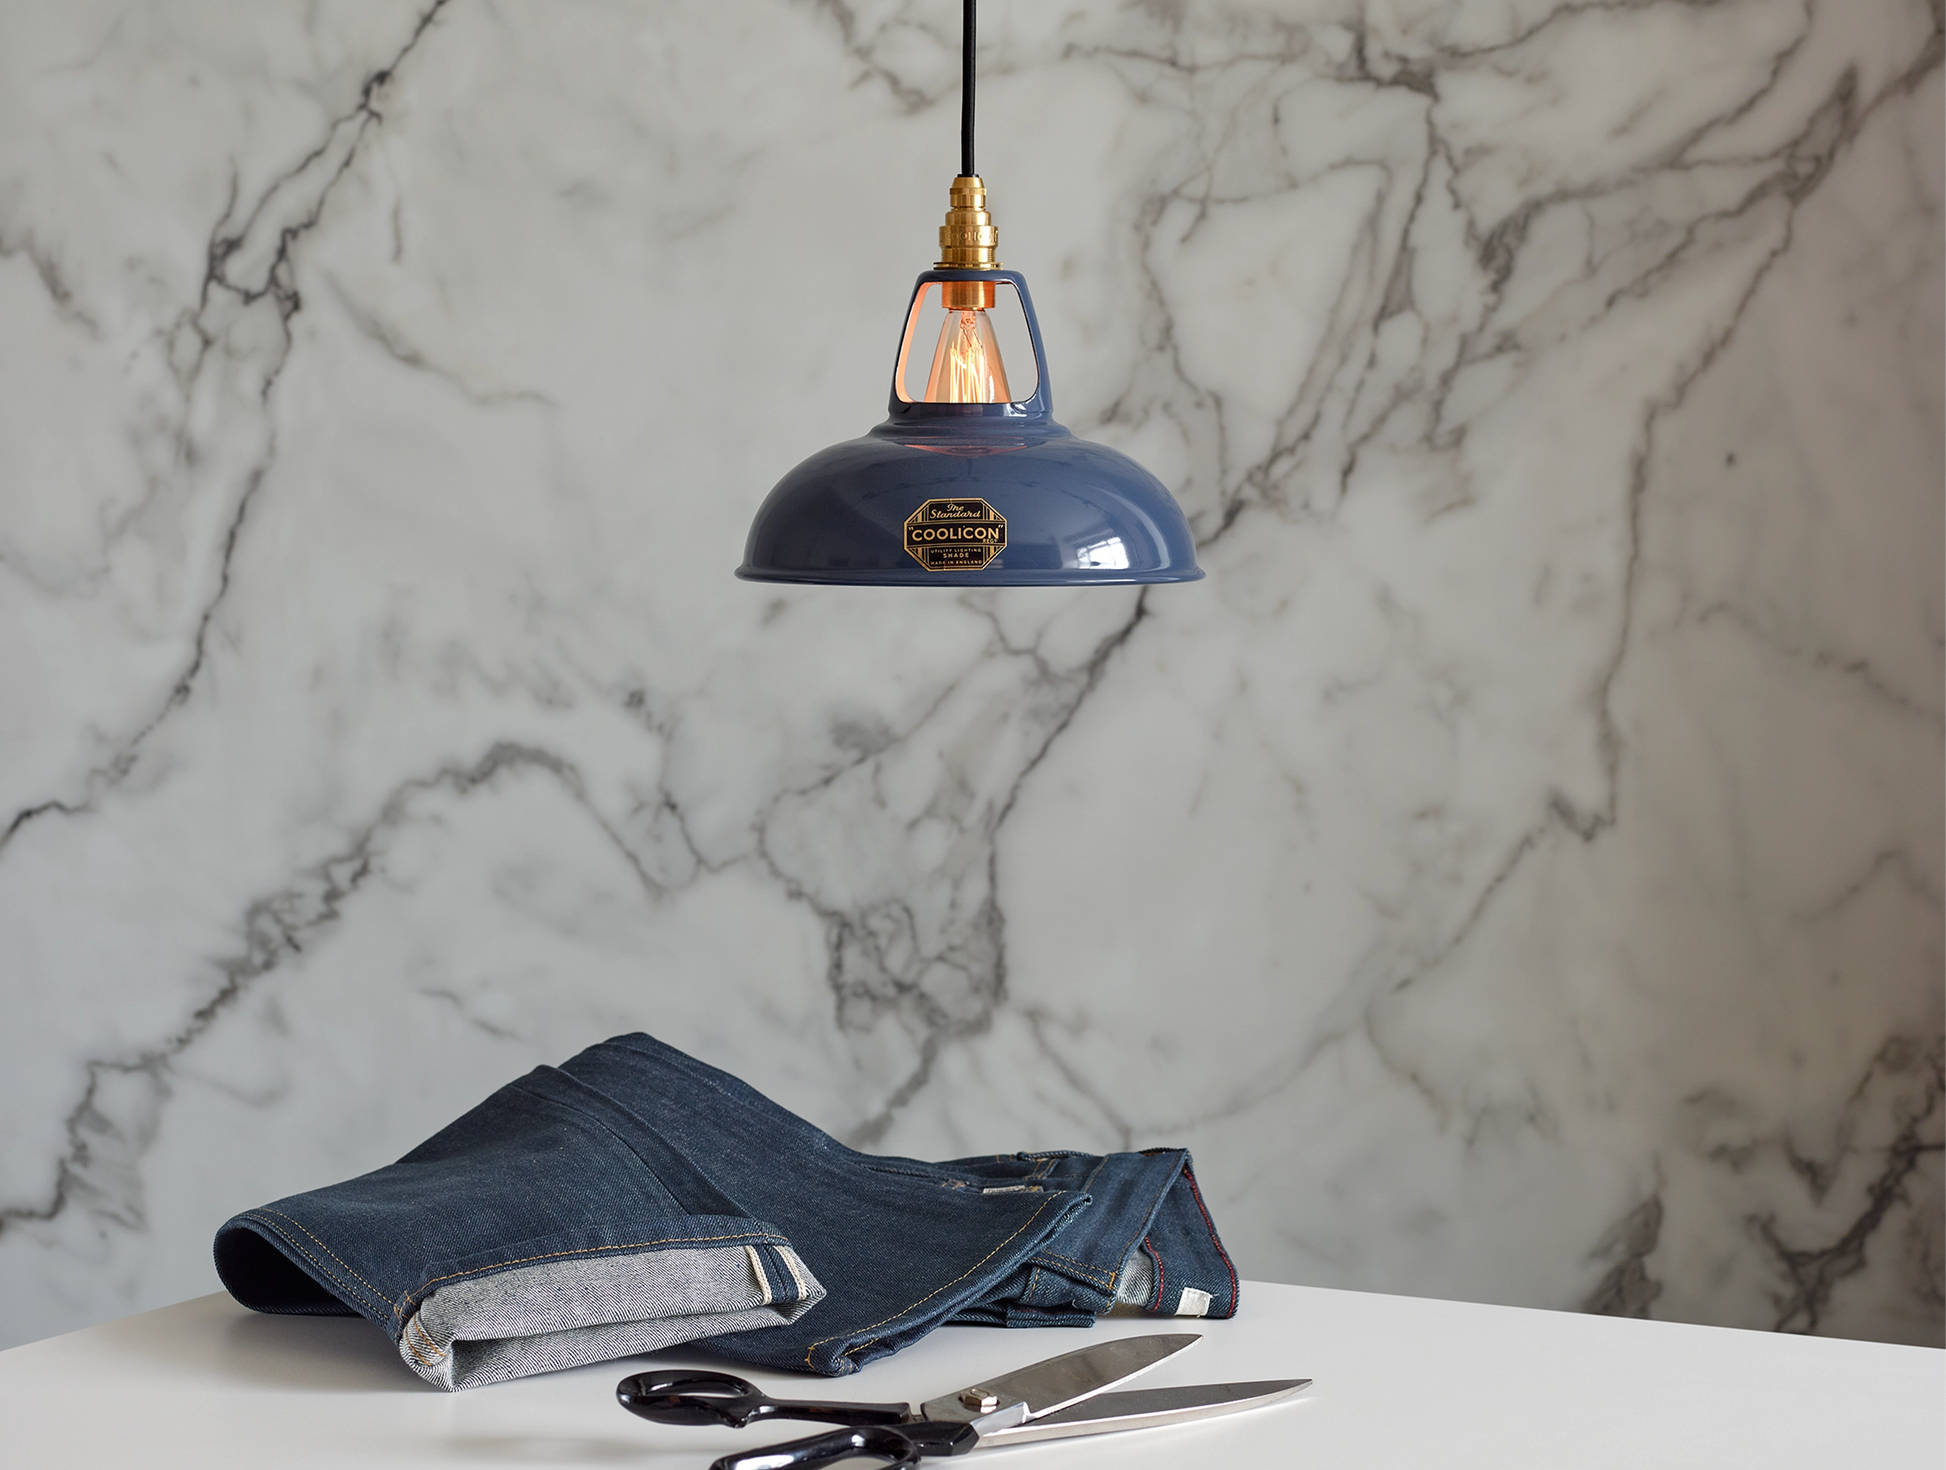 A Coolicon Selvedge blue lampshade with a Signature Brass pendant set hanging above a table with a pair of jeans and fabric scissors. The background is a marble wallpaper.